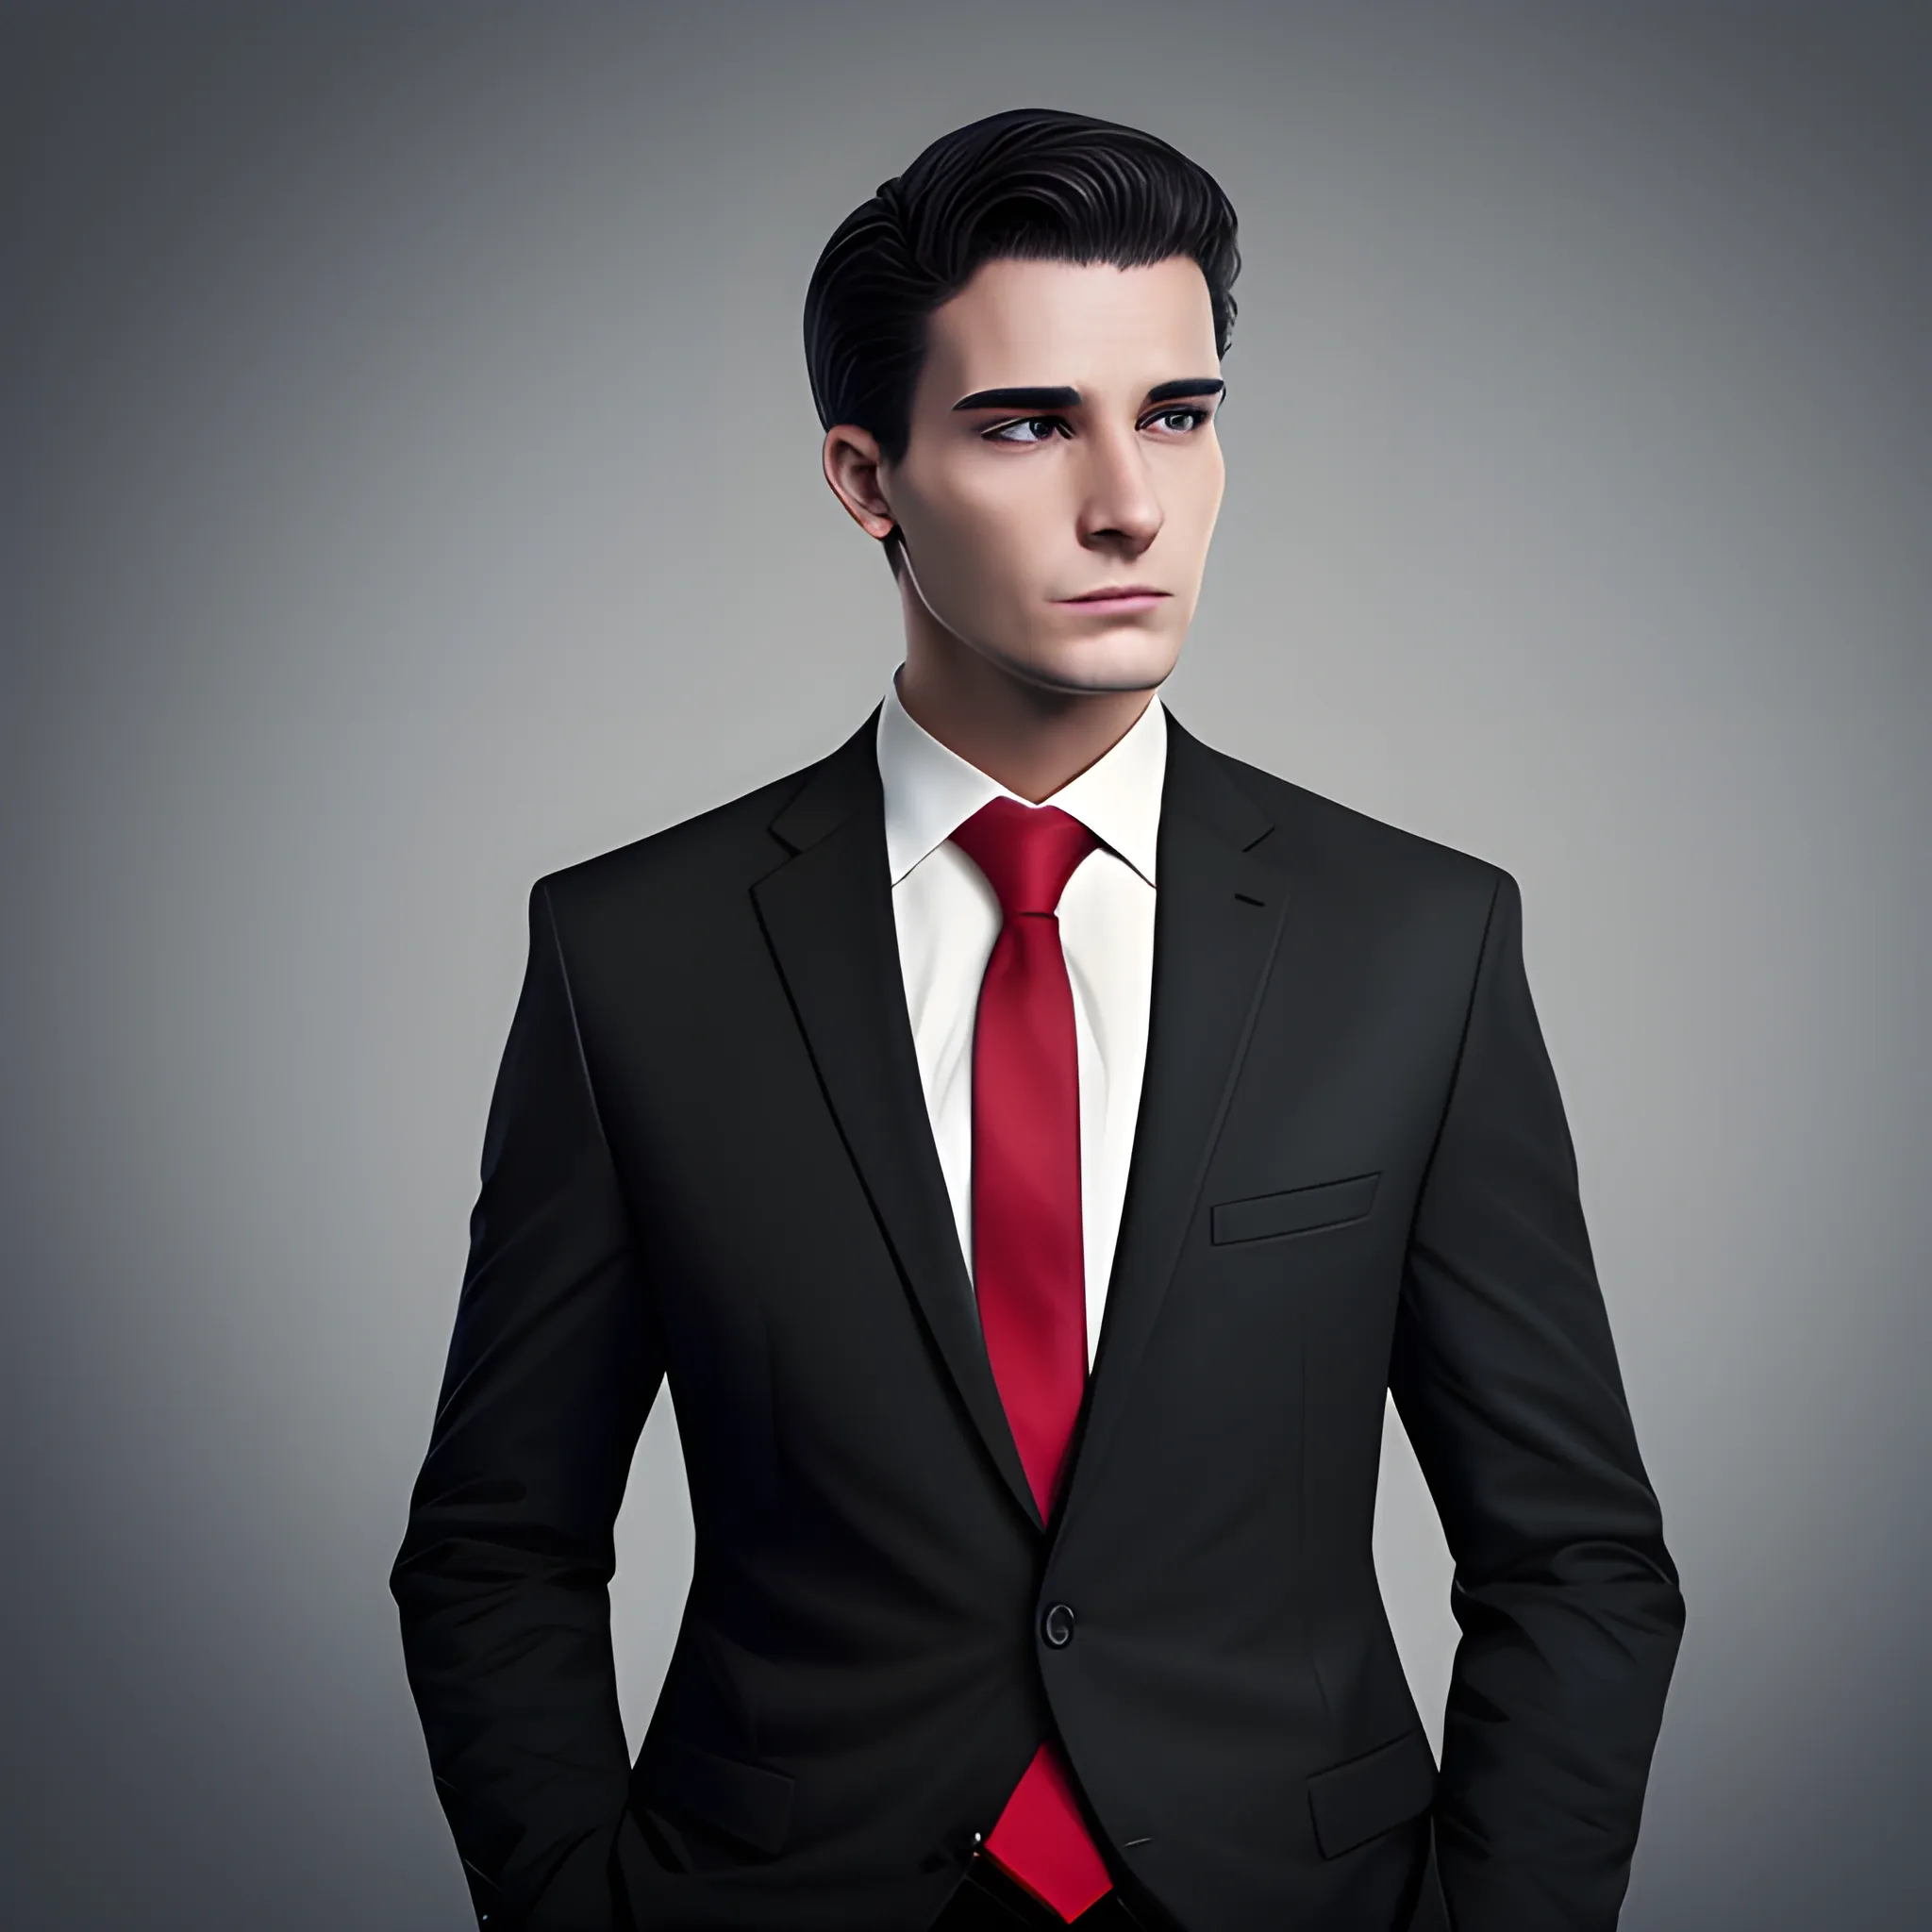 Classic Male Black Suit Red Tie Stock Vector (Royalty Free) 570878980 |  Shutterstock